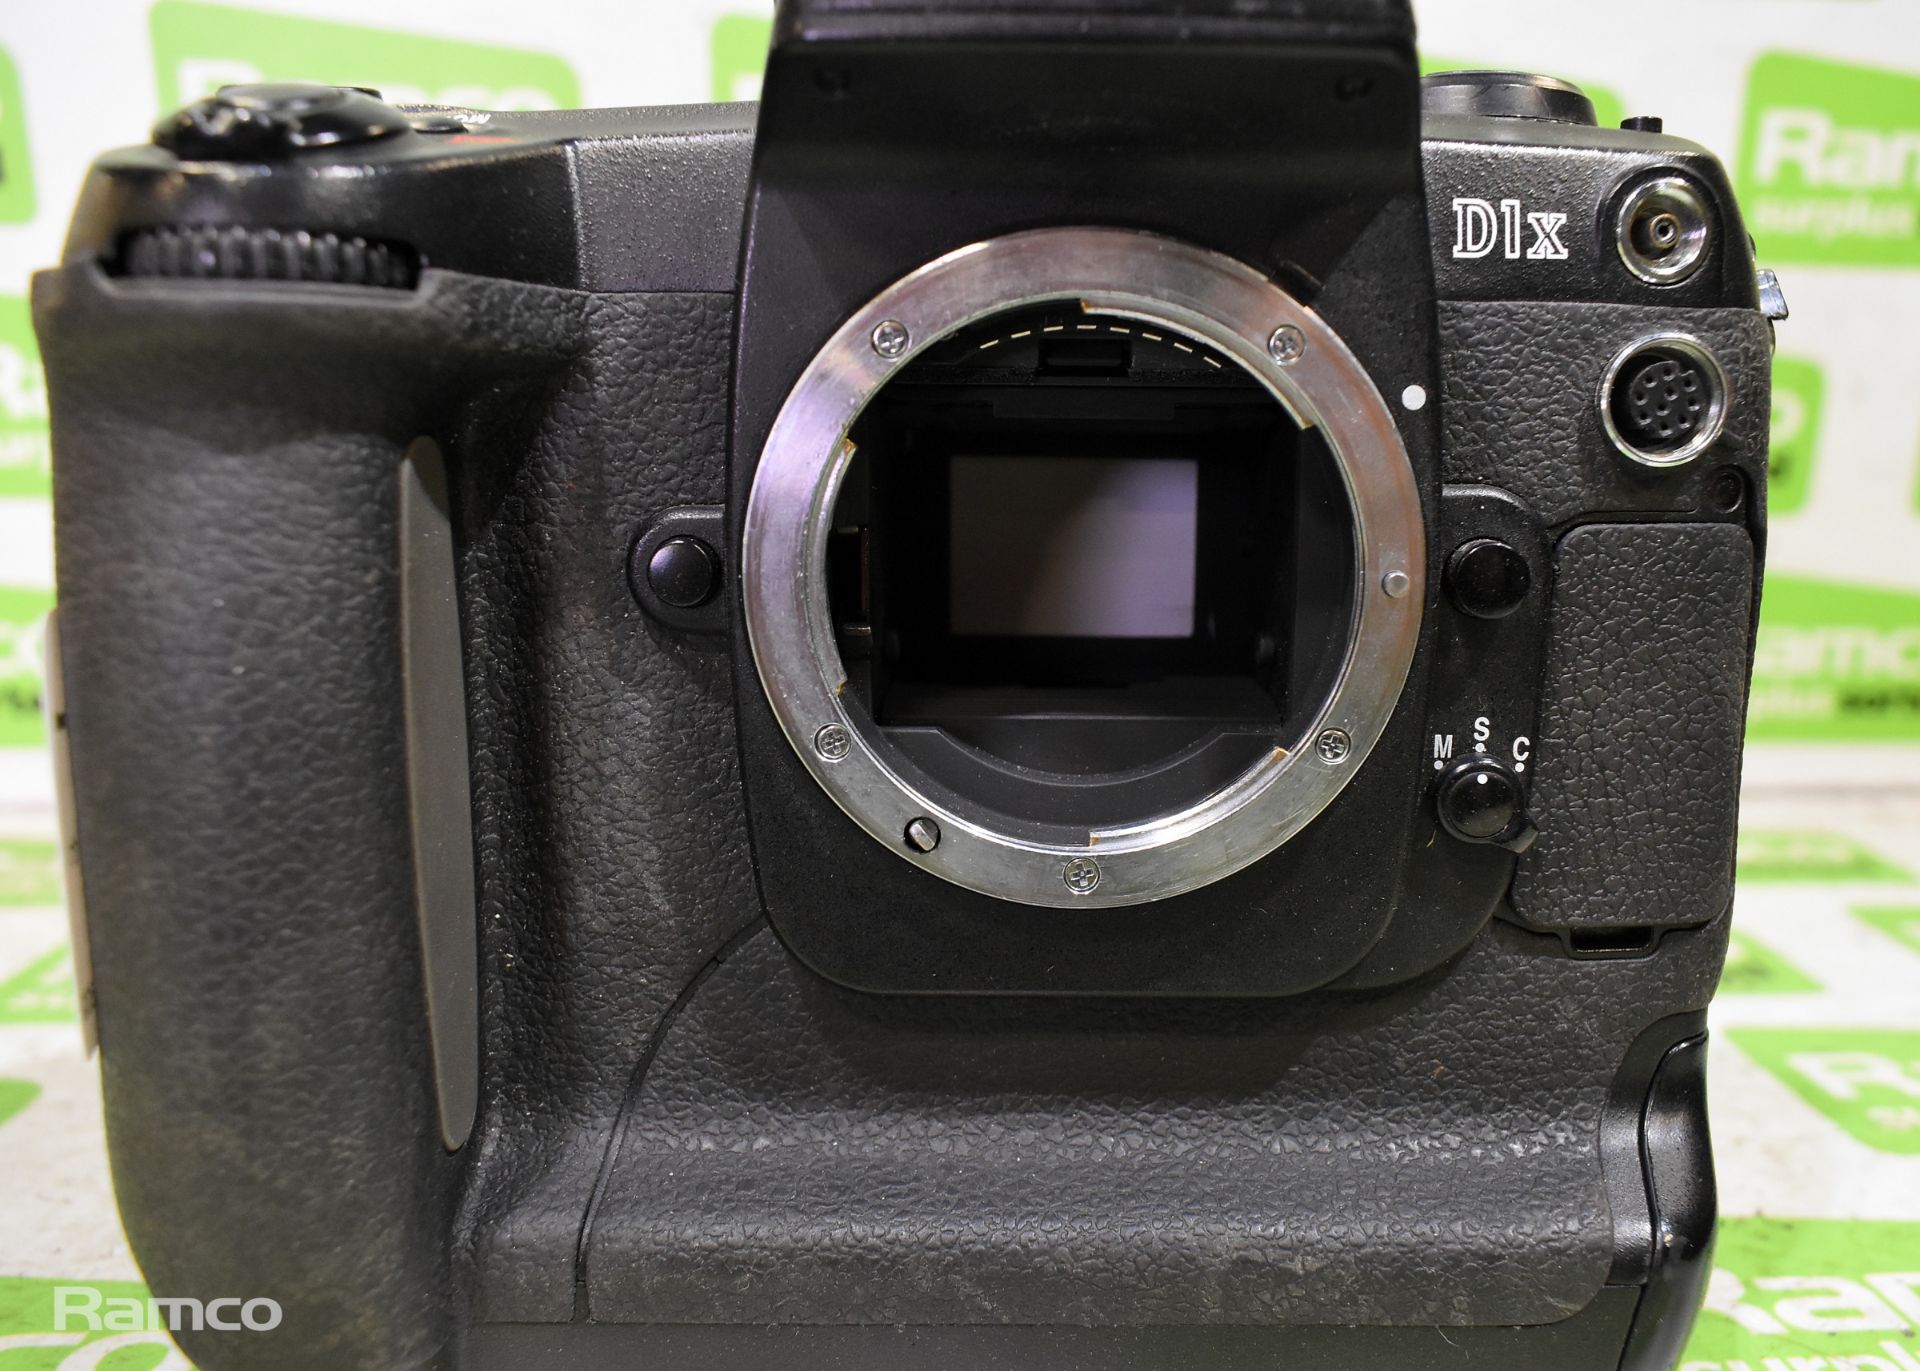 Nikon D1x Digital camera with MH-16 quick charger - Image 6 of 8